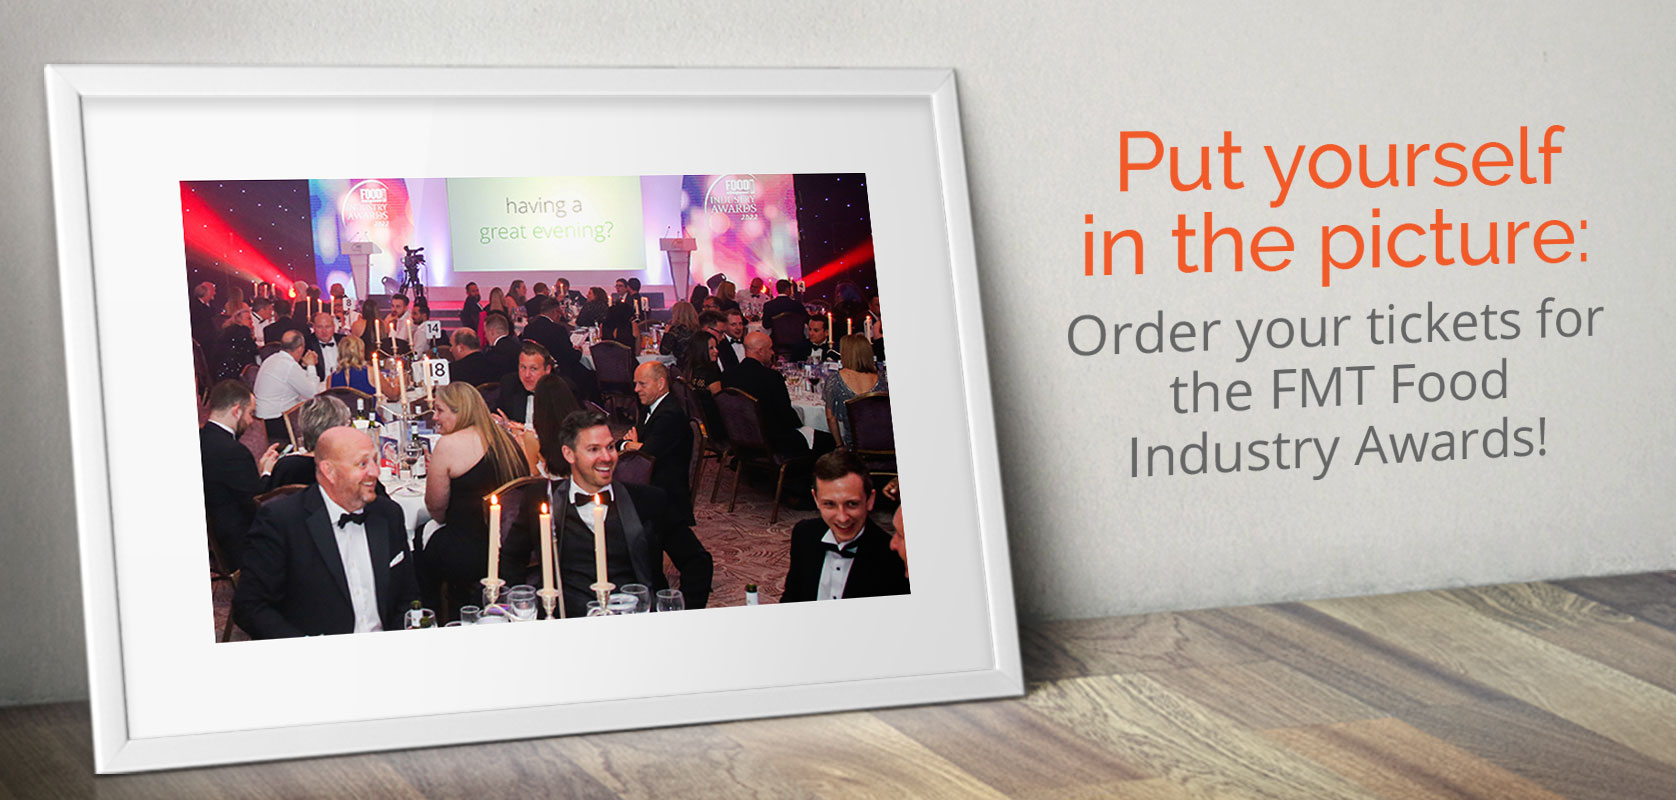 Order your tickets for the FMT Food Industry Awards!